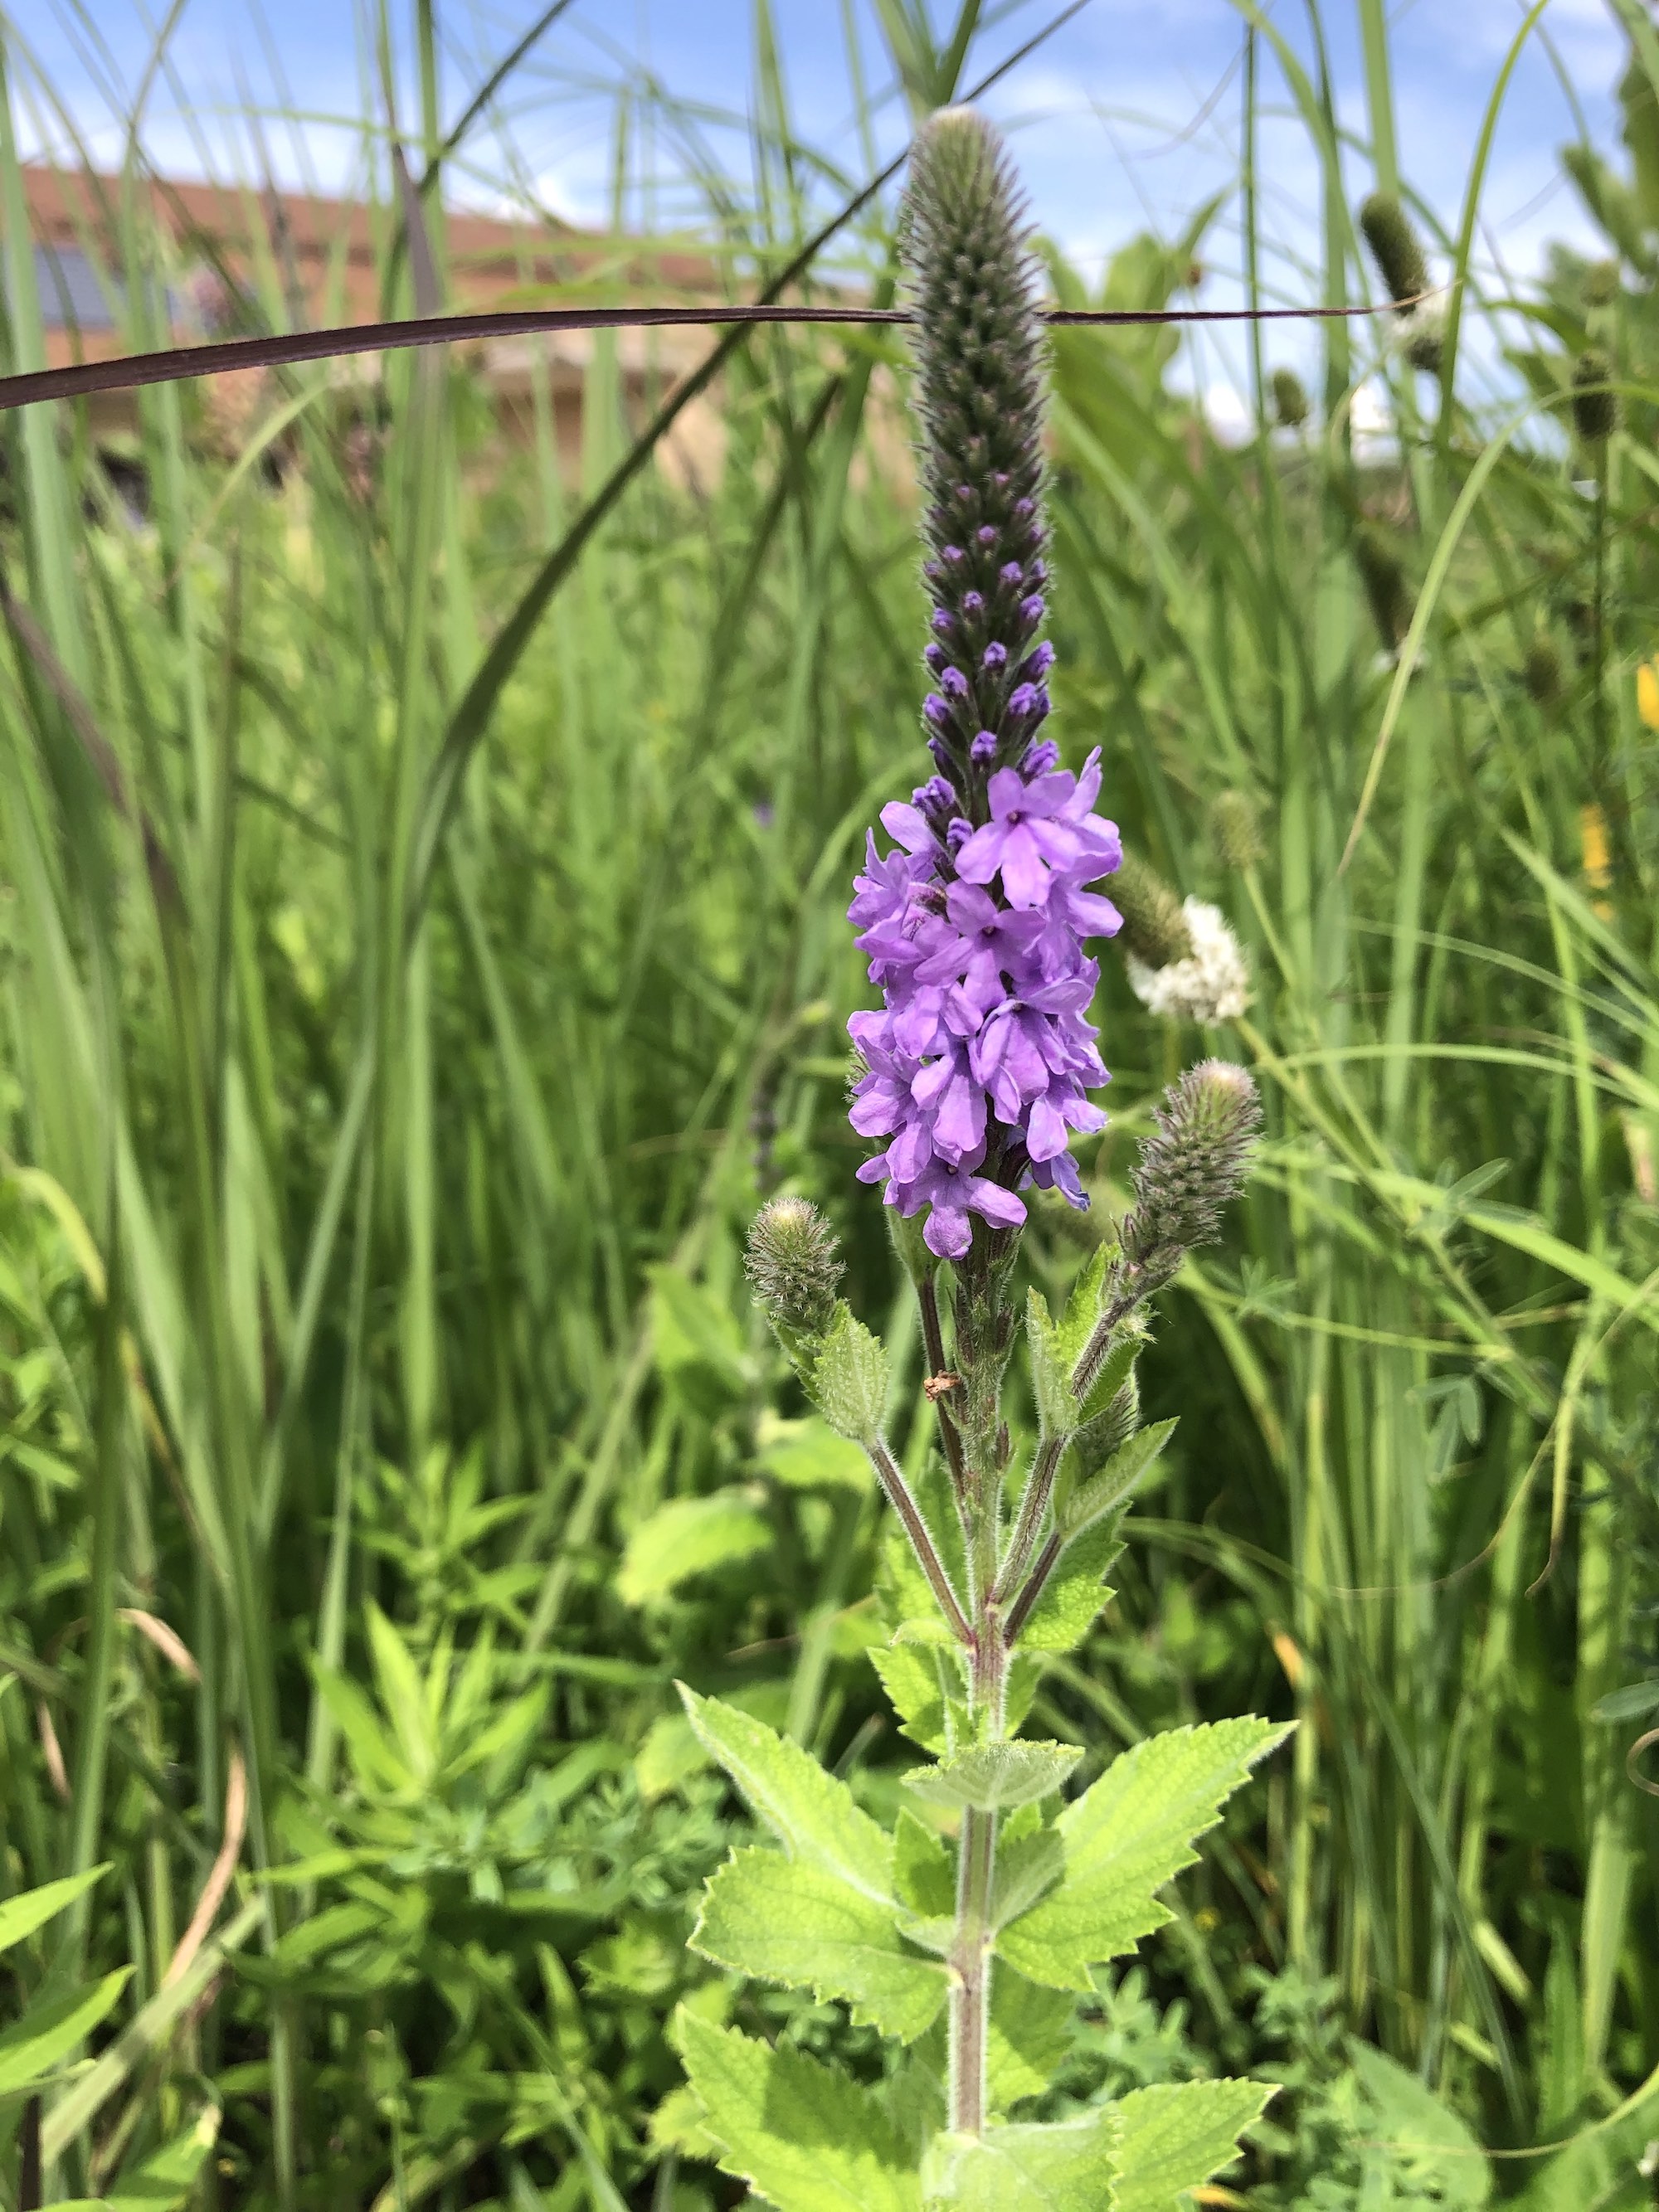 Hoary Vervain next to the UW Arboretum Visitors Center parking lot on June 30, 2020.